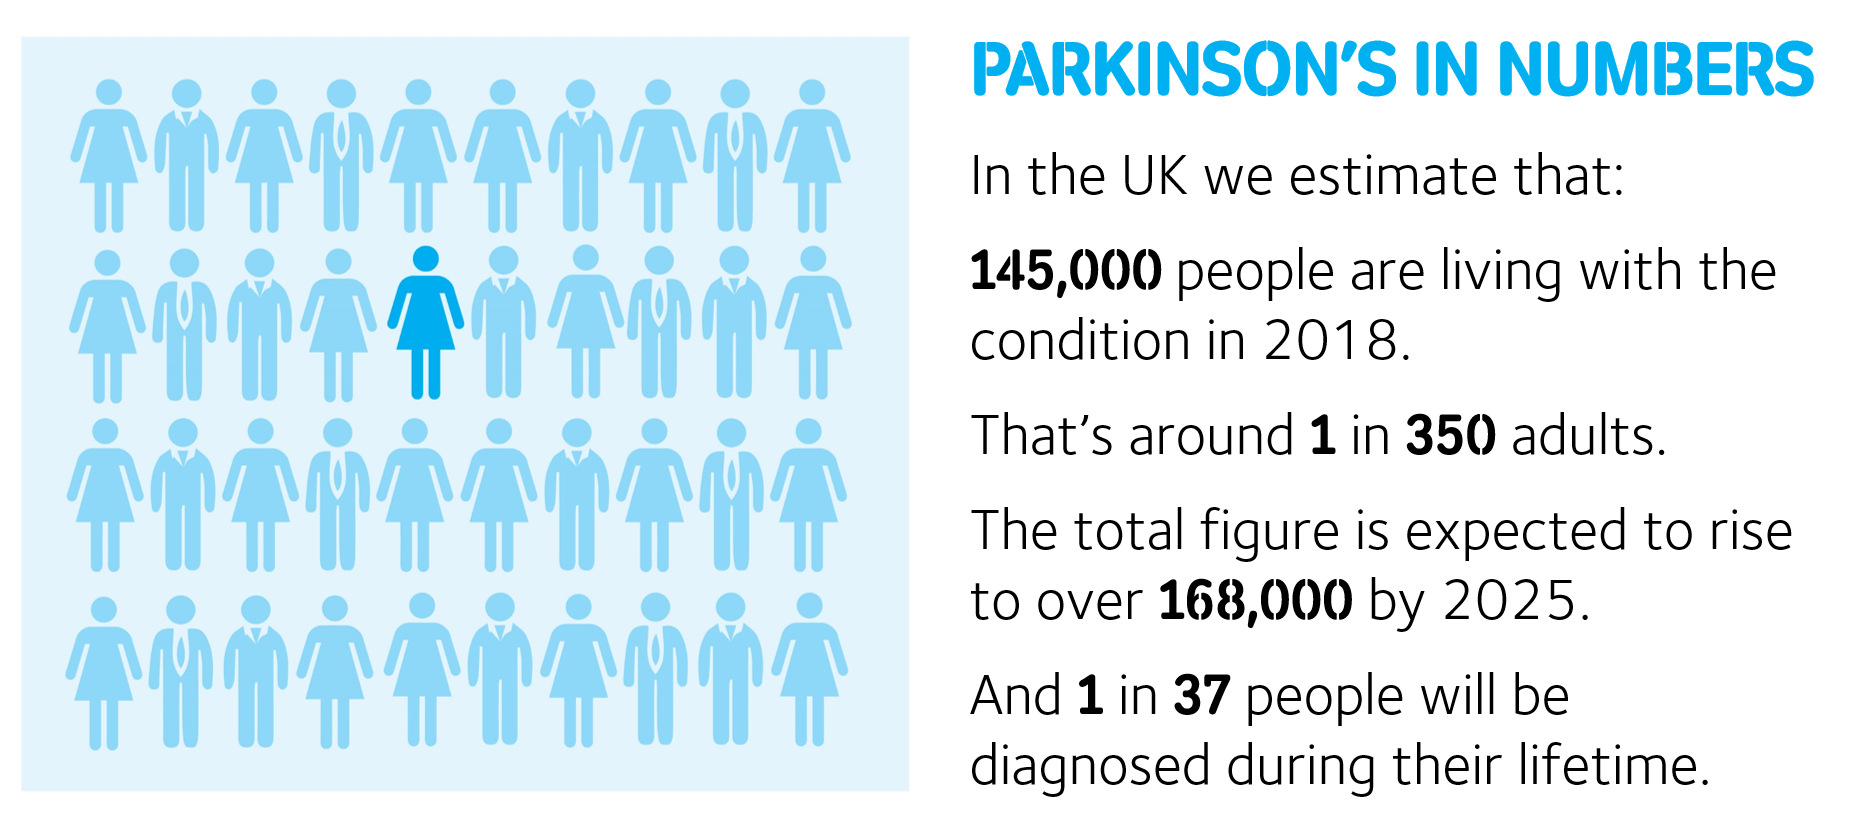 How many people have Parkinsons?